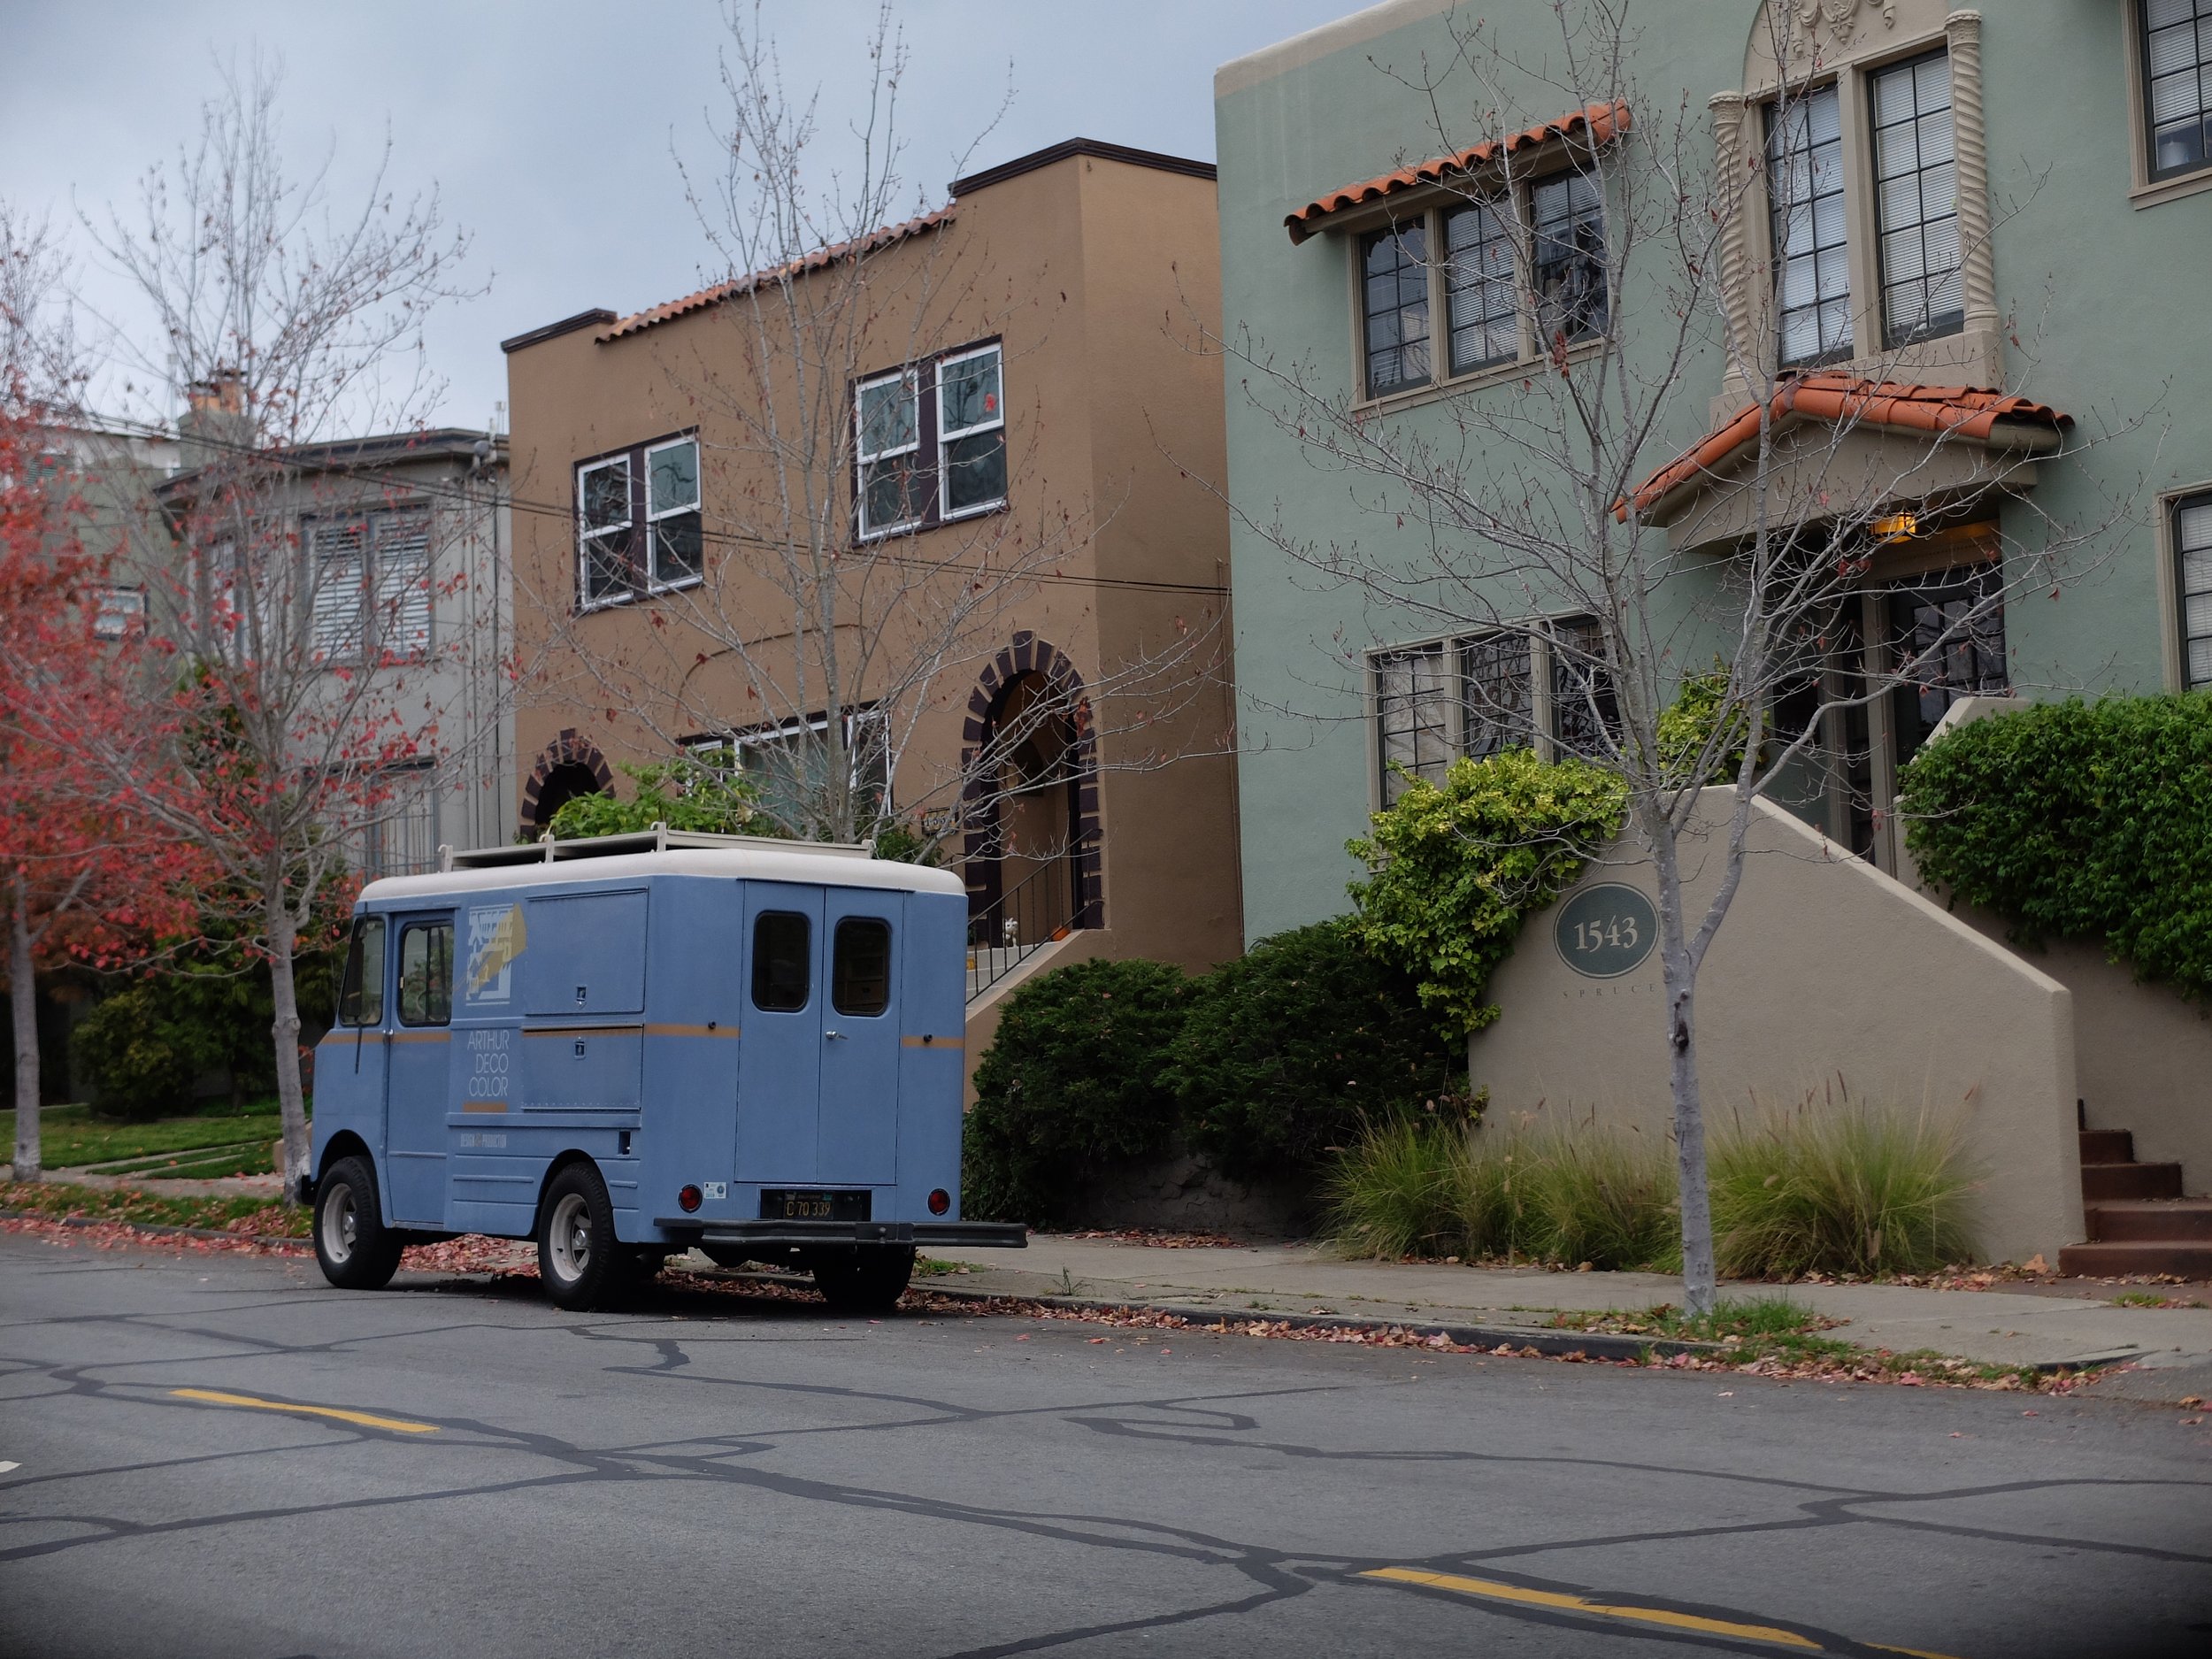 I noticed this truck/van down the street.  I thought it looked vintage &amp; perhaps British or maybe a milk delivery van in a former life. 